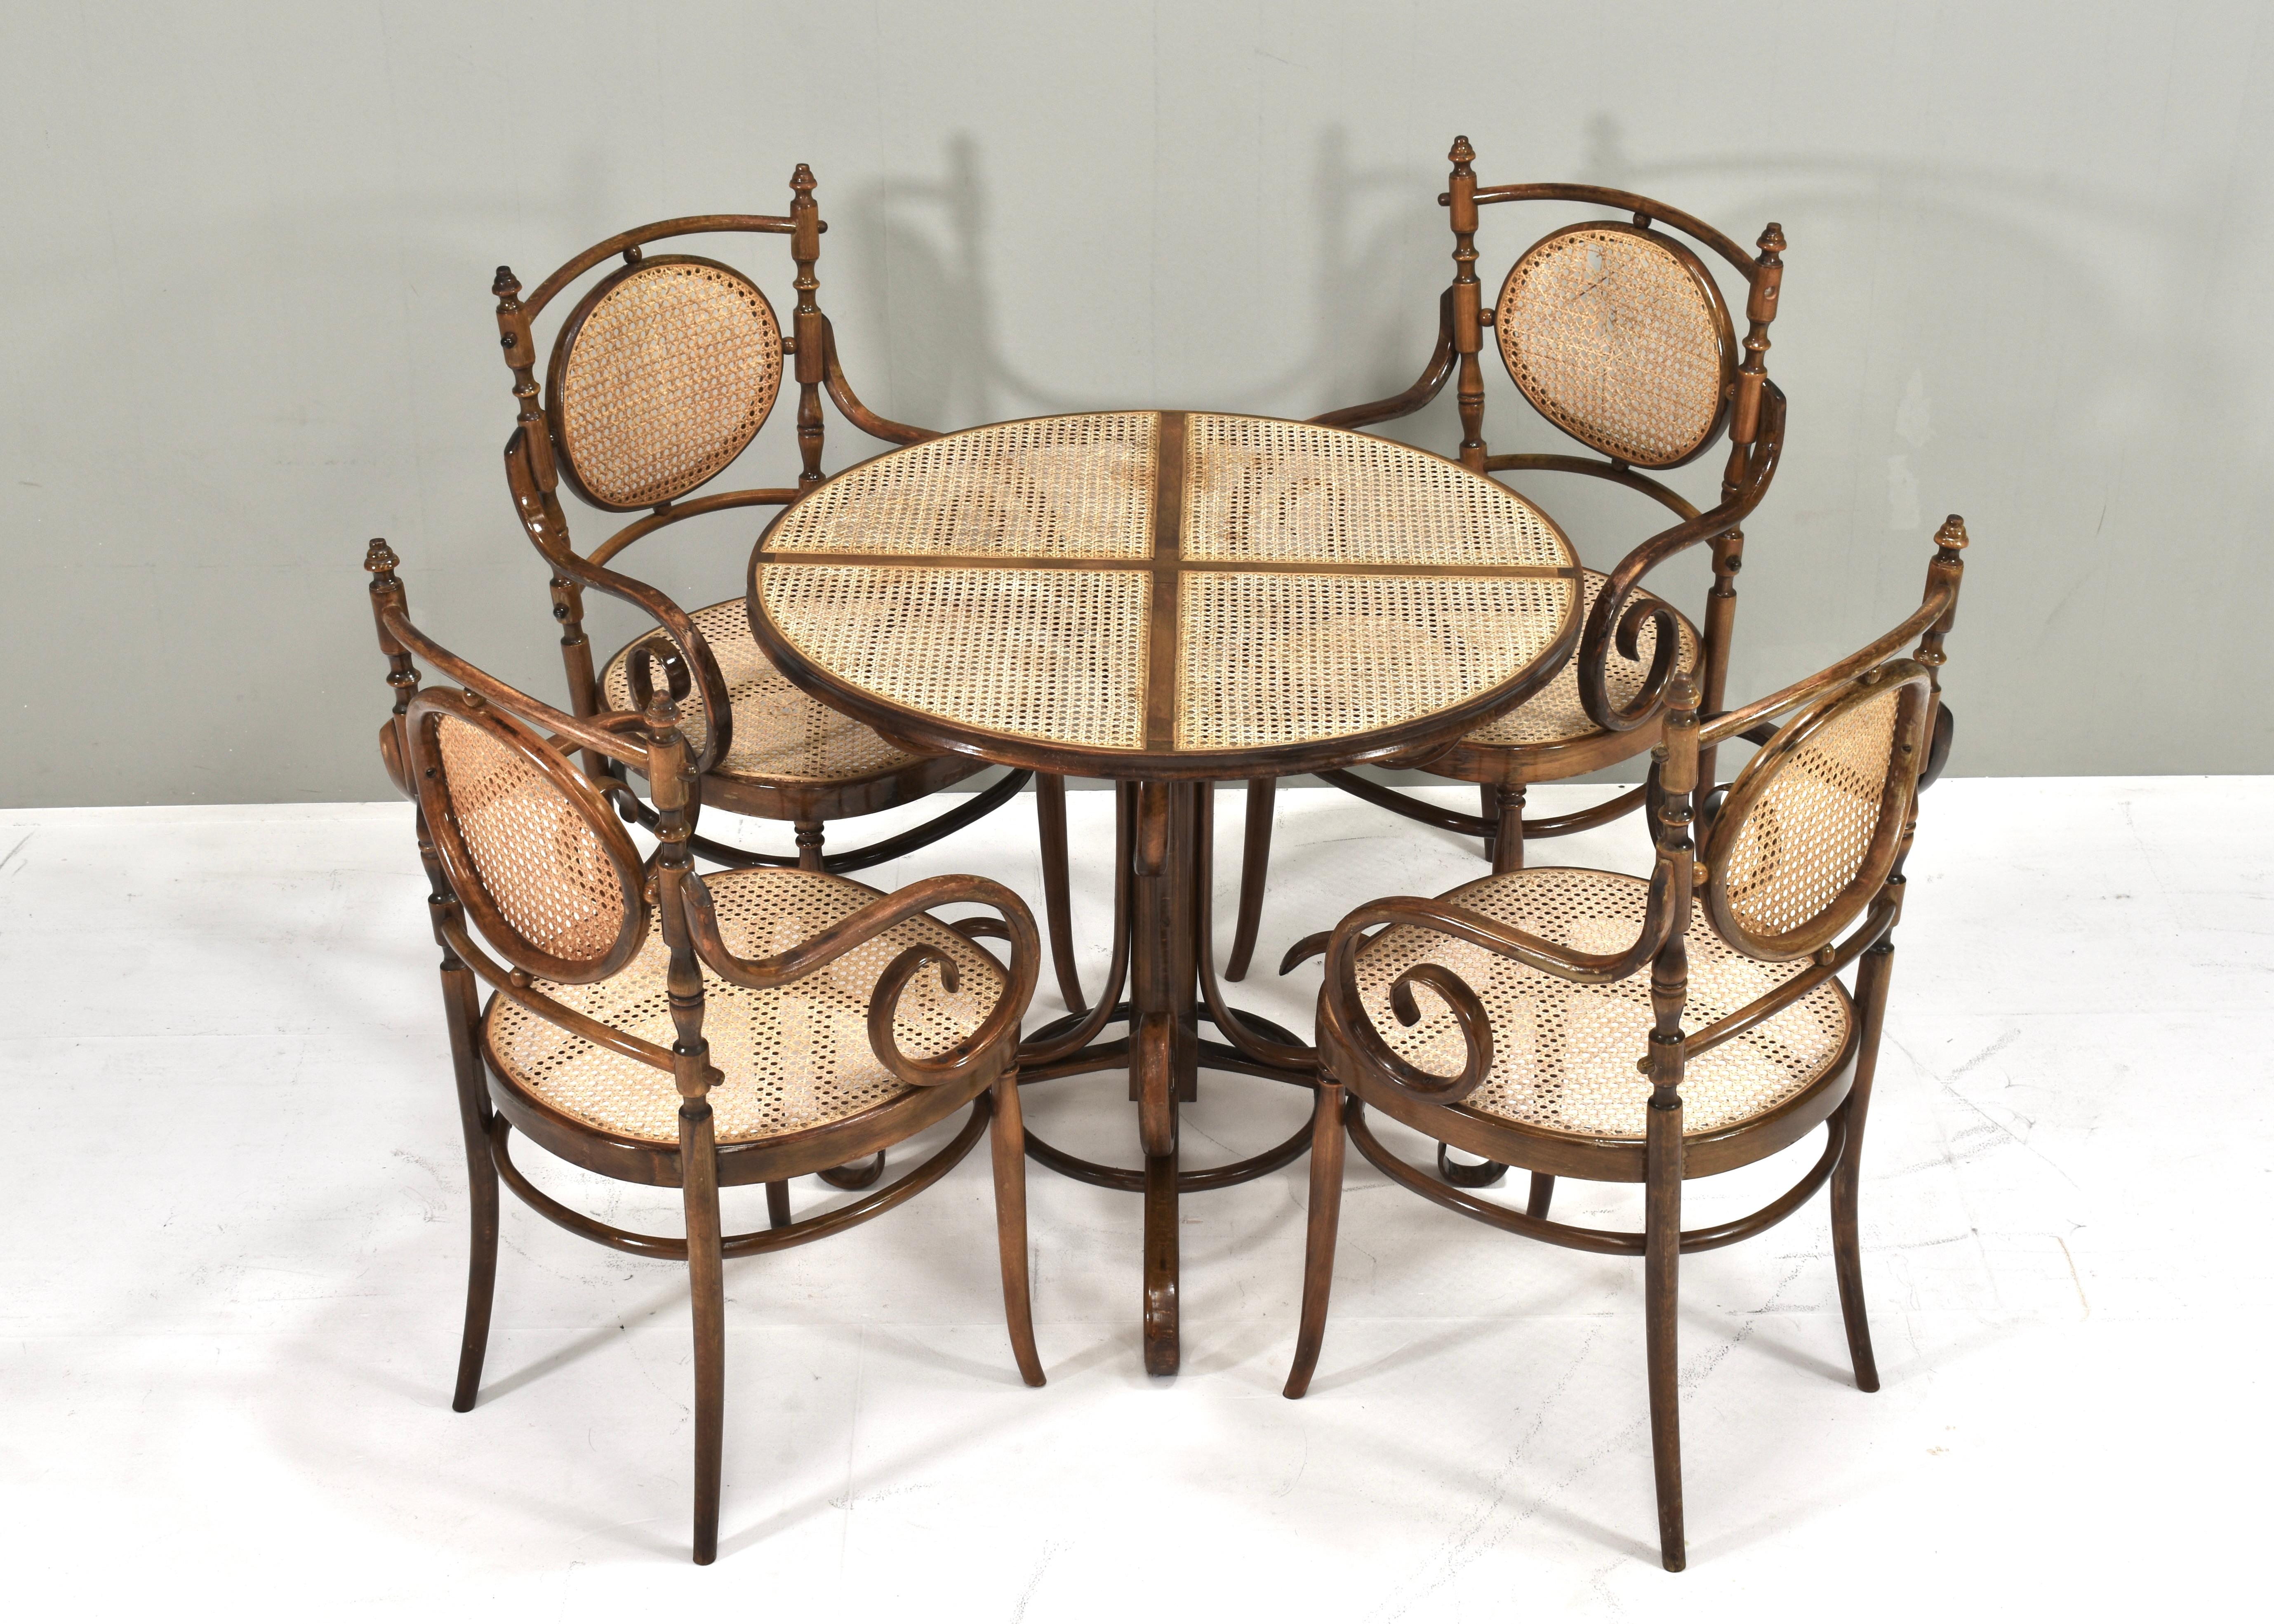 Bistro dining table in bentwood and cane designed by Michael Thonet. Originally designed in the 1860s and produced by Thonet in the 20th century by multiple factories.
Size:
chairs: 57x49x96.5 seat height 46 Arm height 67 centimeter
table: ø85.5